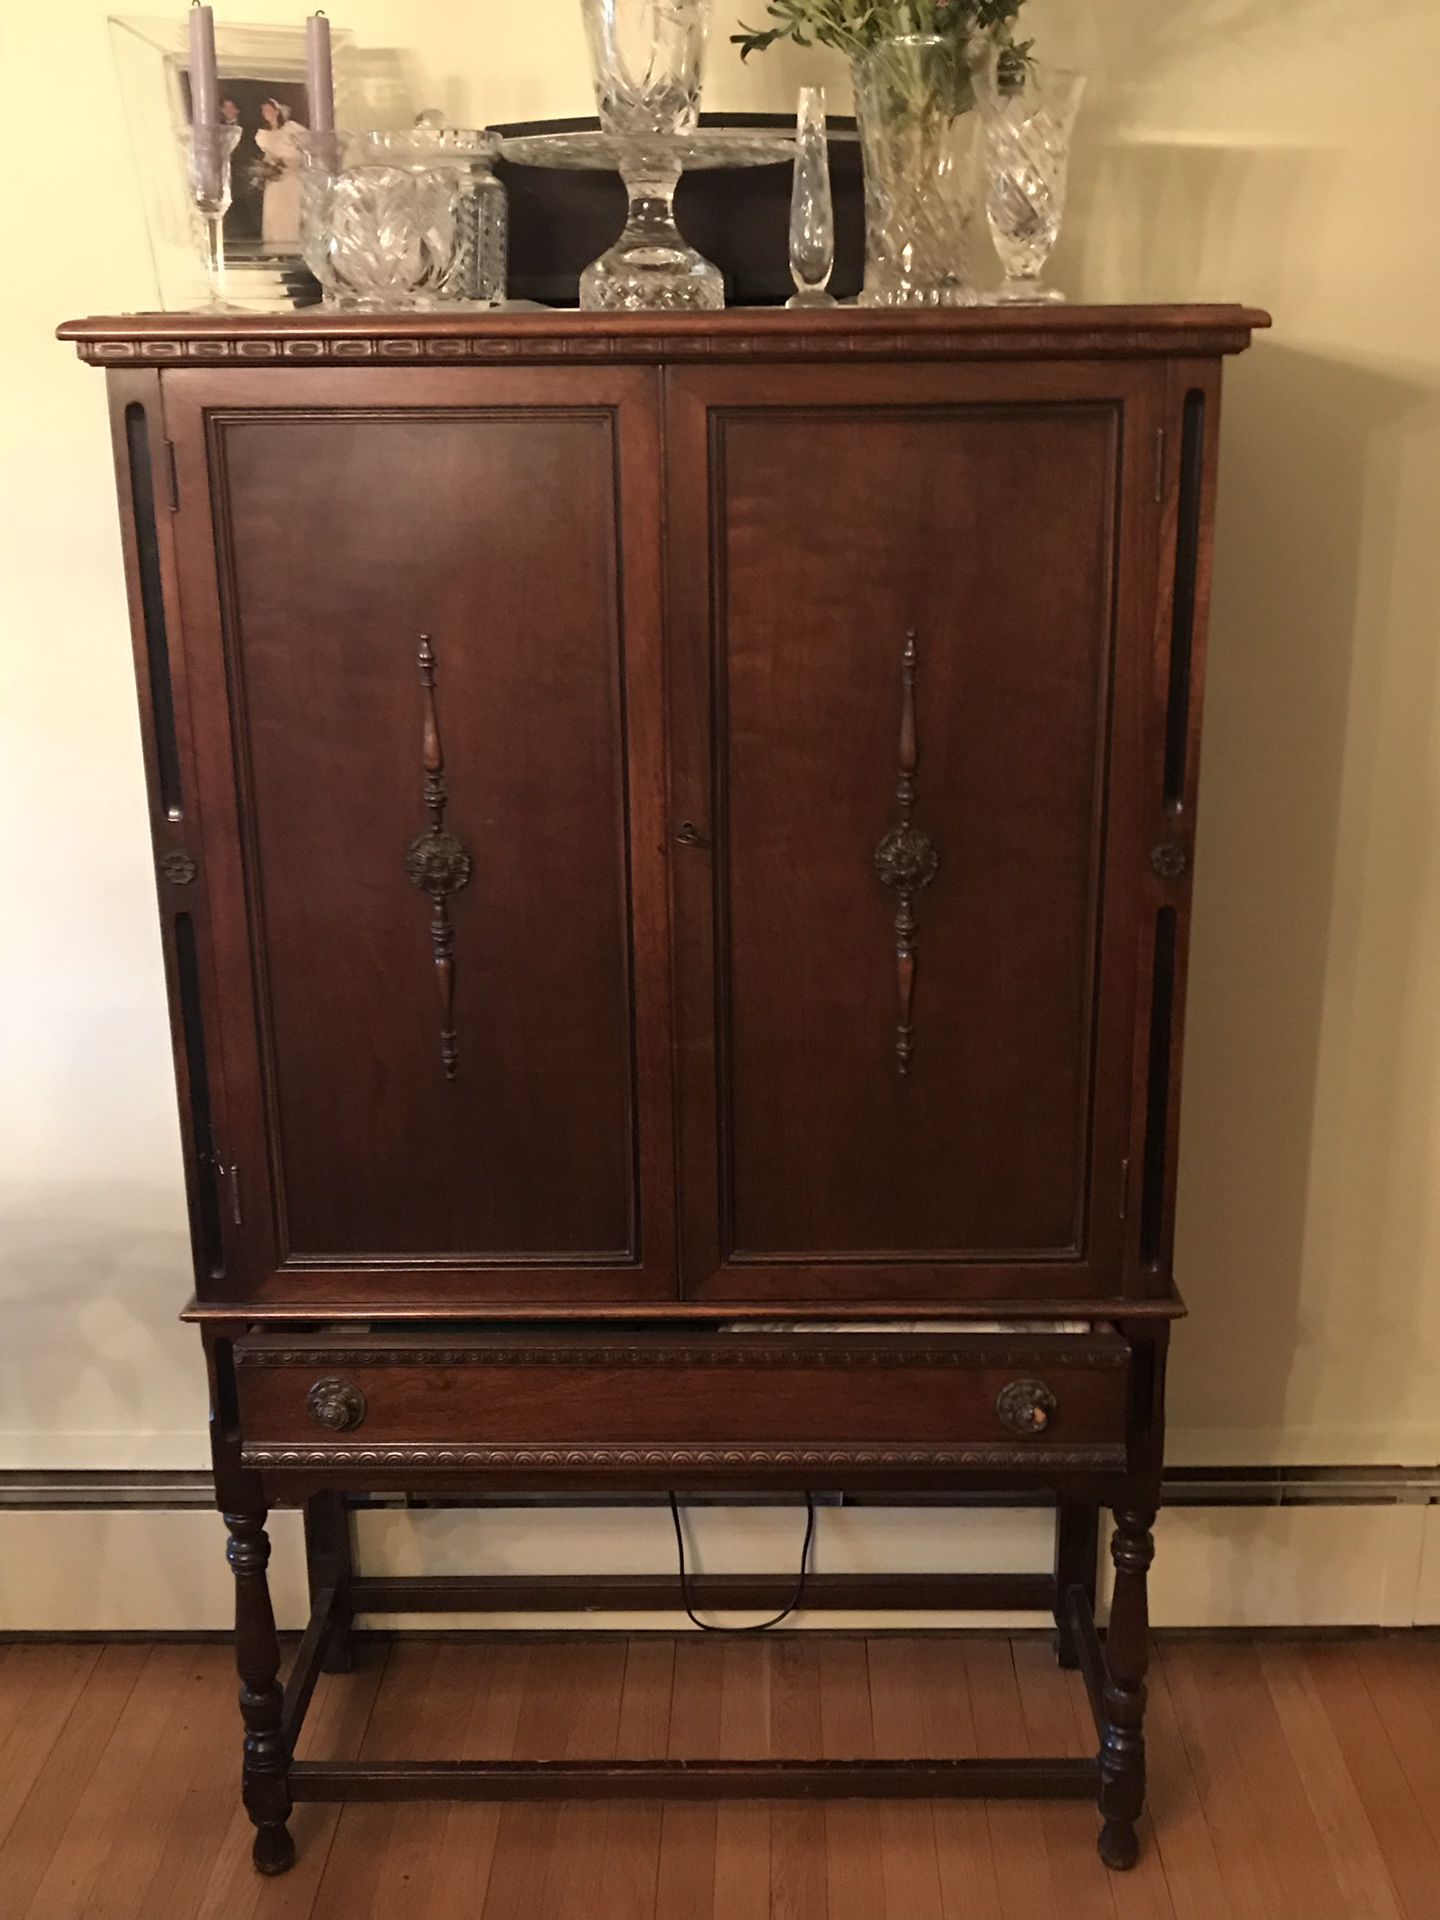 Antique Dining Room Set - includes tall china cabinet, large buffet and small buffet. Willing to sell pieces separately.